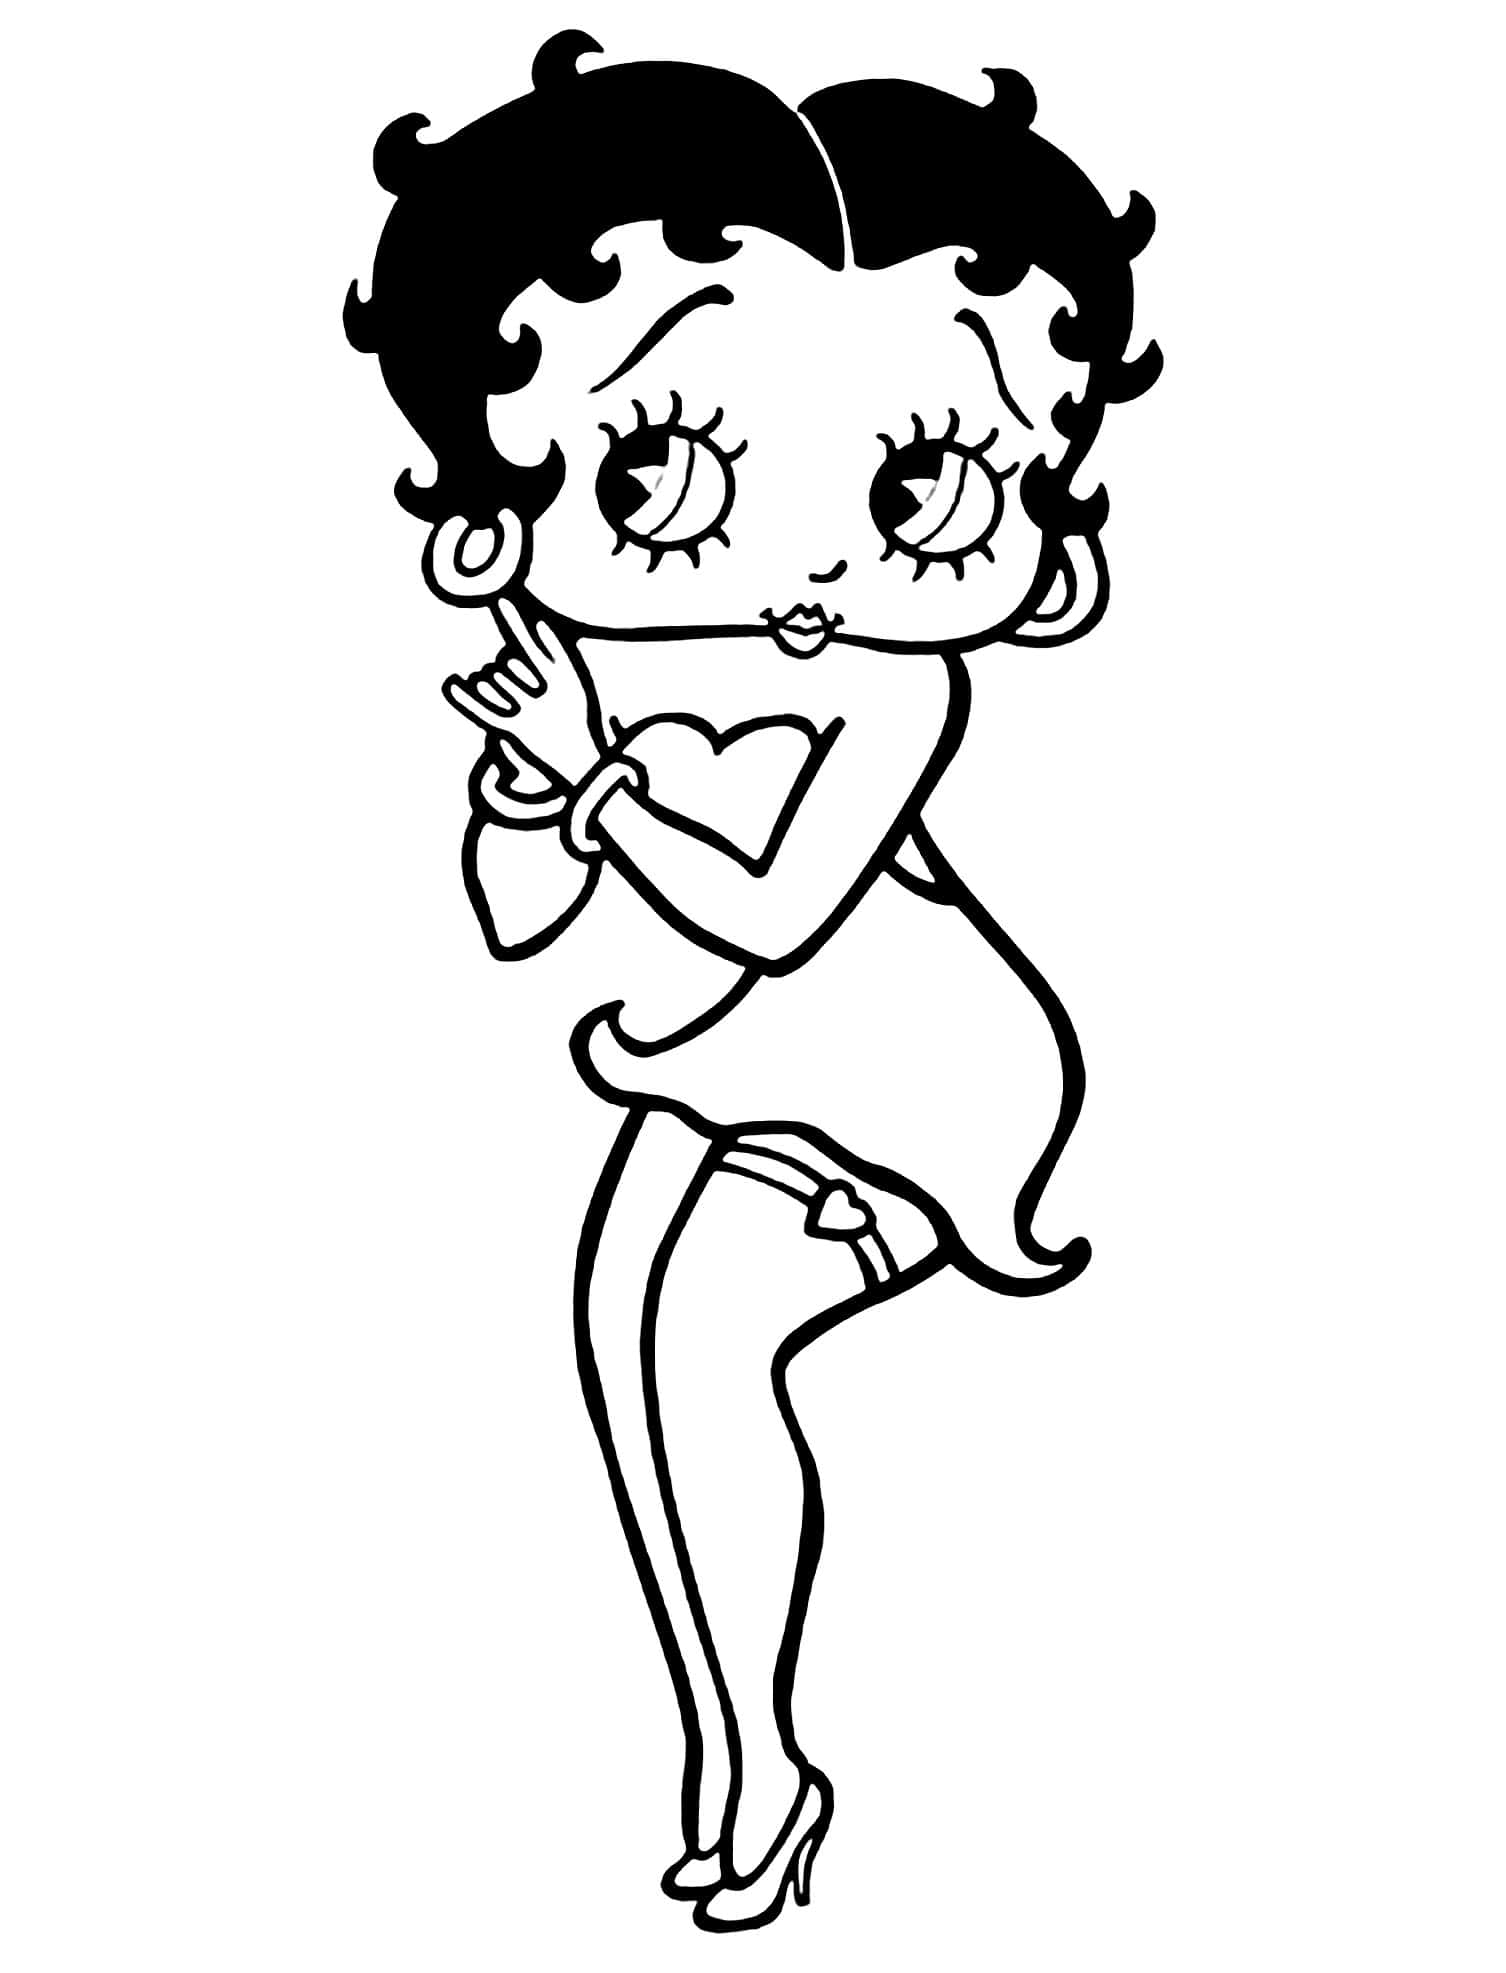 Download Betty Boop Extravagantly Posed in a Glamorous Outfit ...